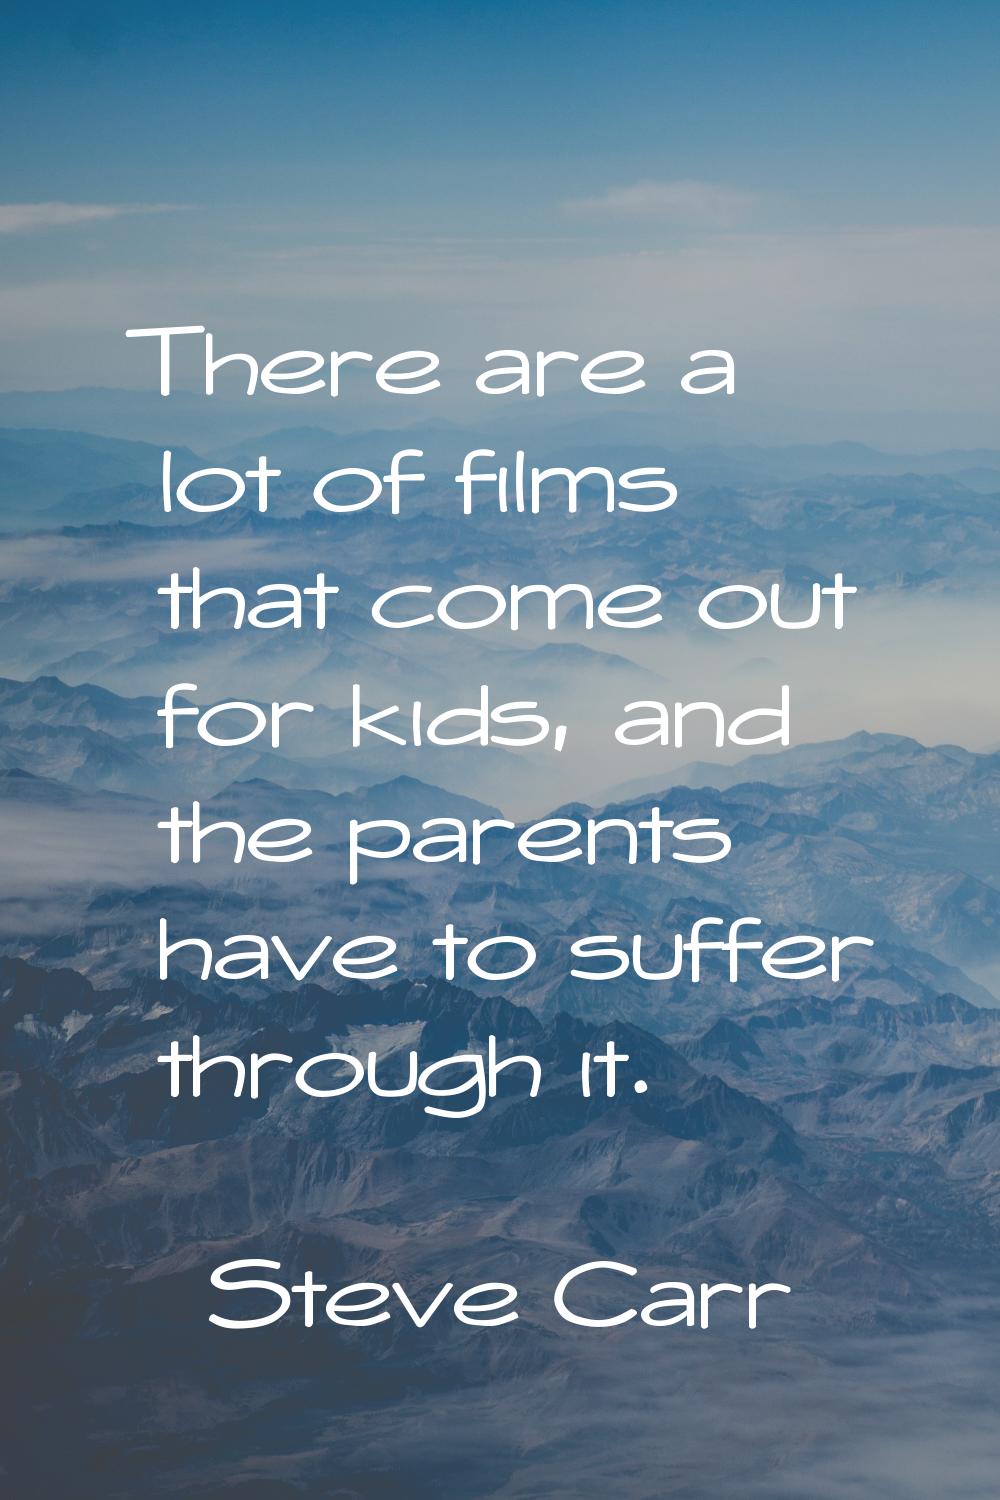 There are a lot of films that come out for kids, and the parents have to suffer through it.